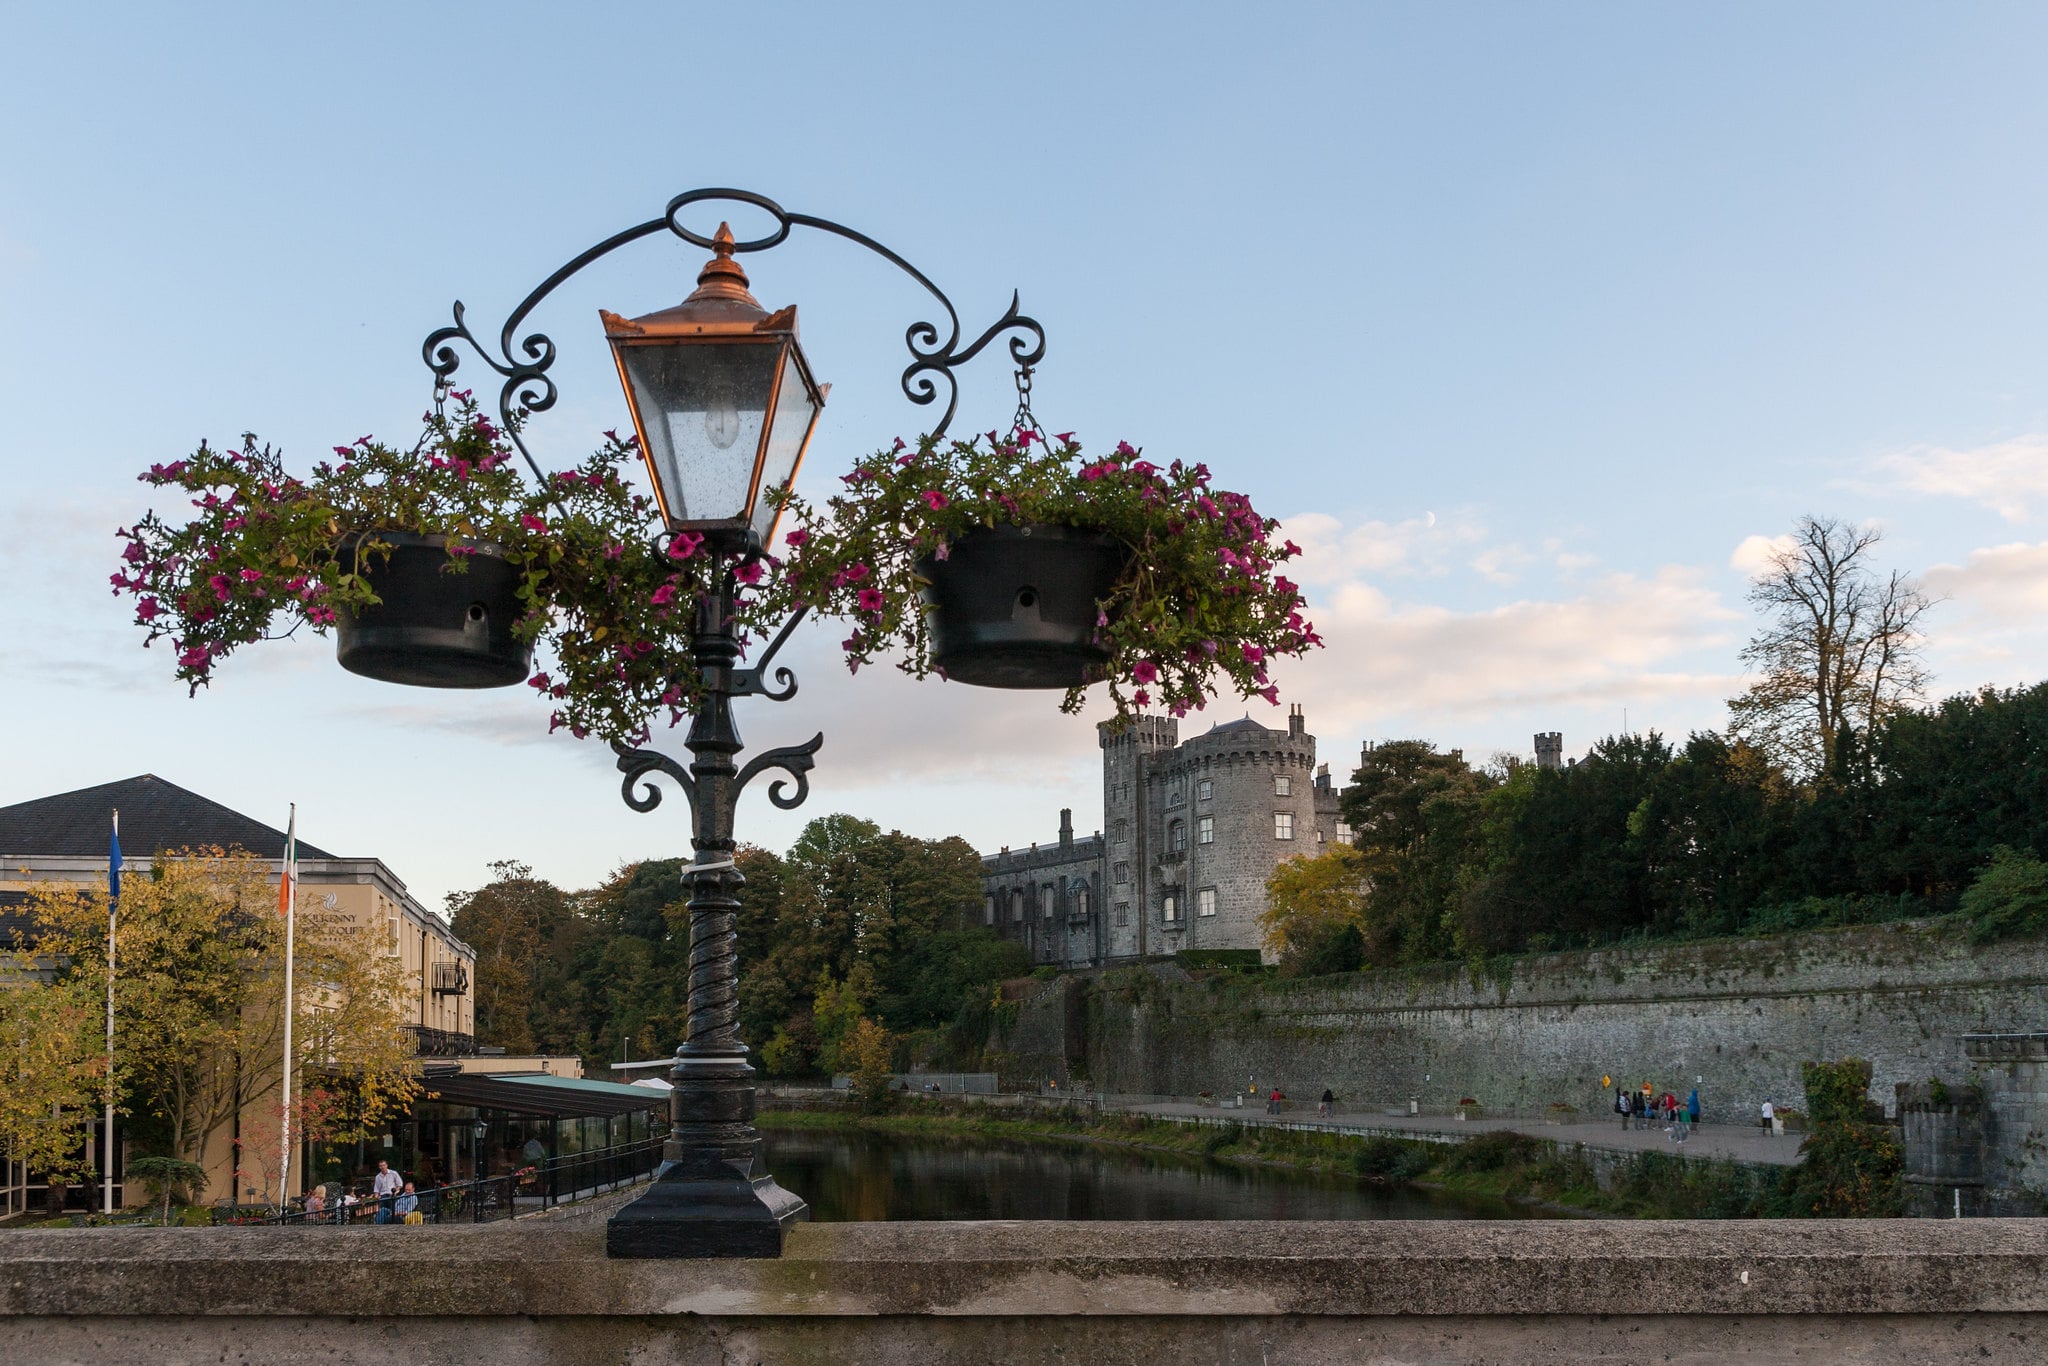 Wandering the Medieval Mile is a great thing to do in Kilkenny Ireland